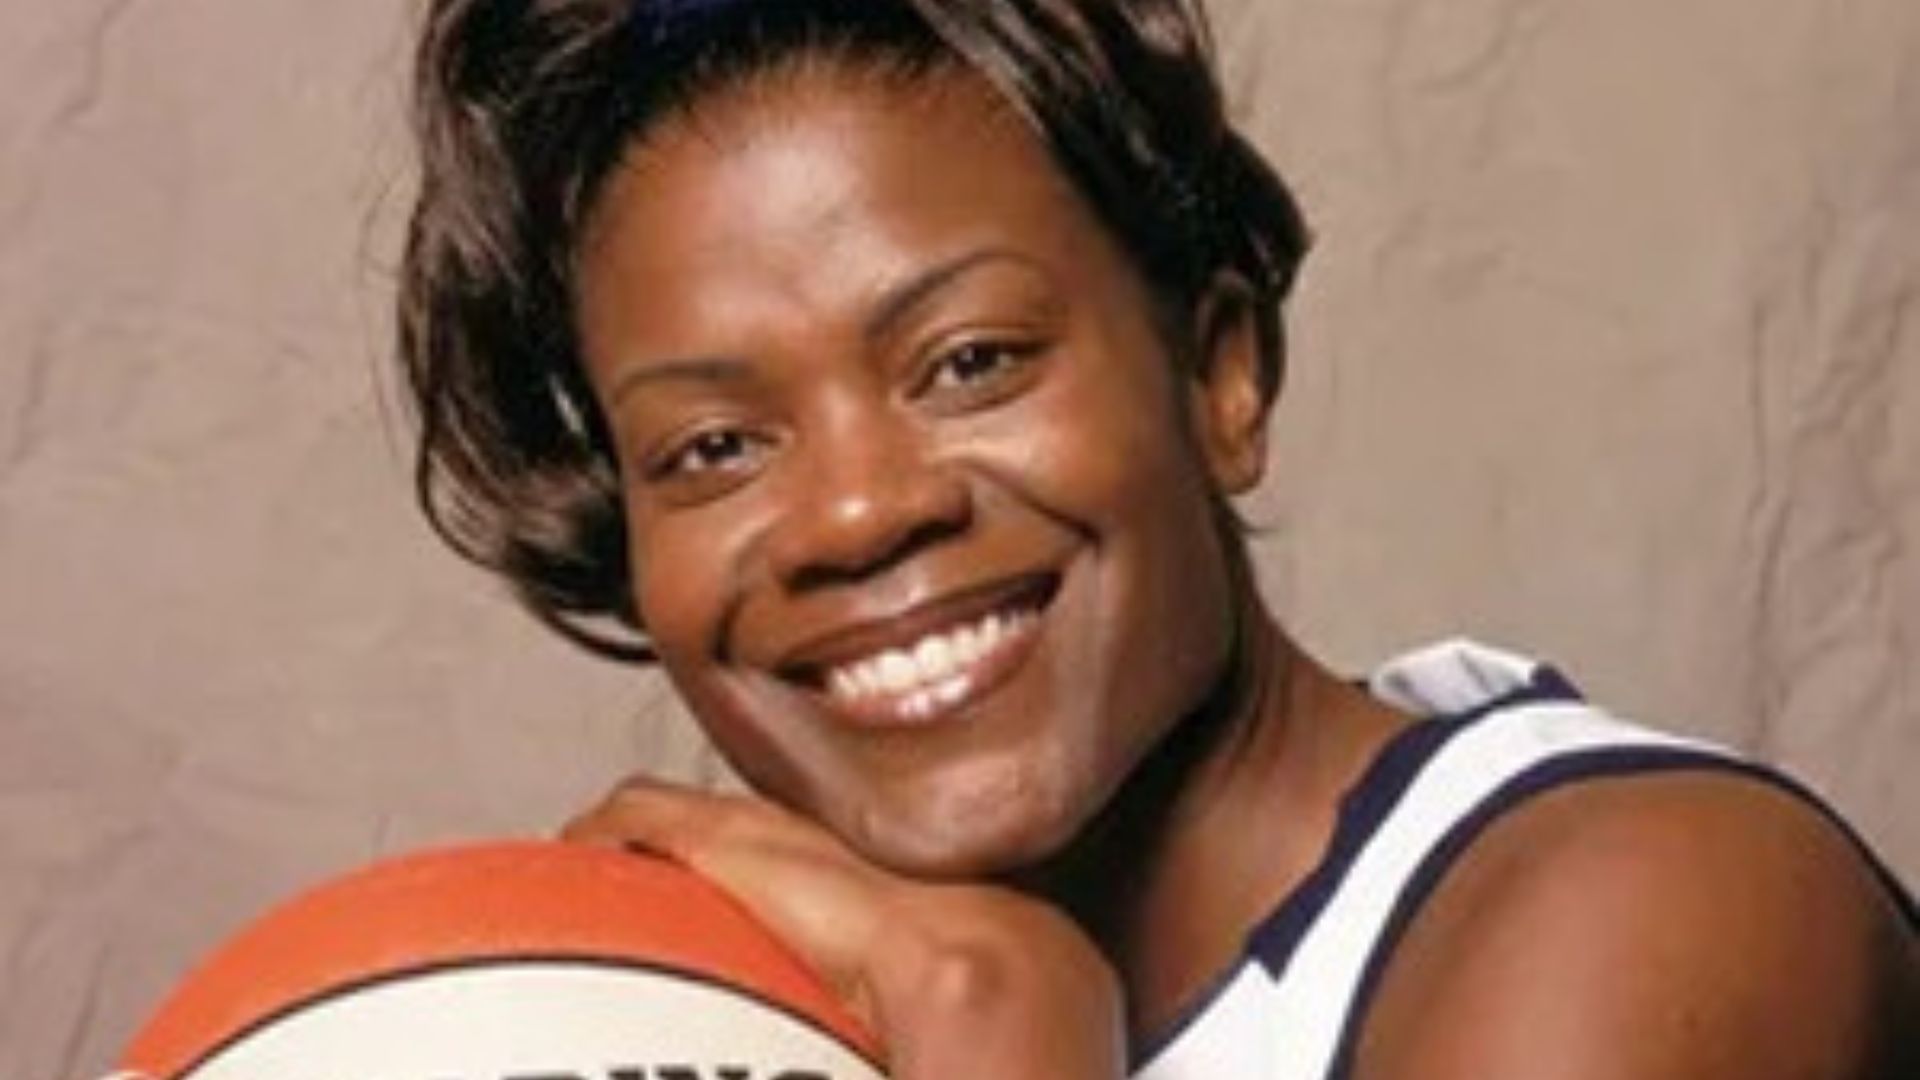 Chris Unclesho's Wife Sheryl Denise Swoopes With Basketball